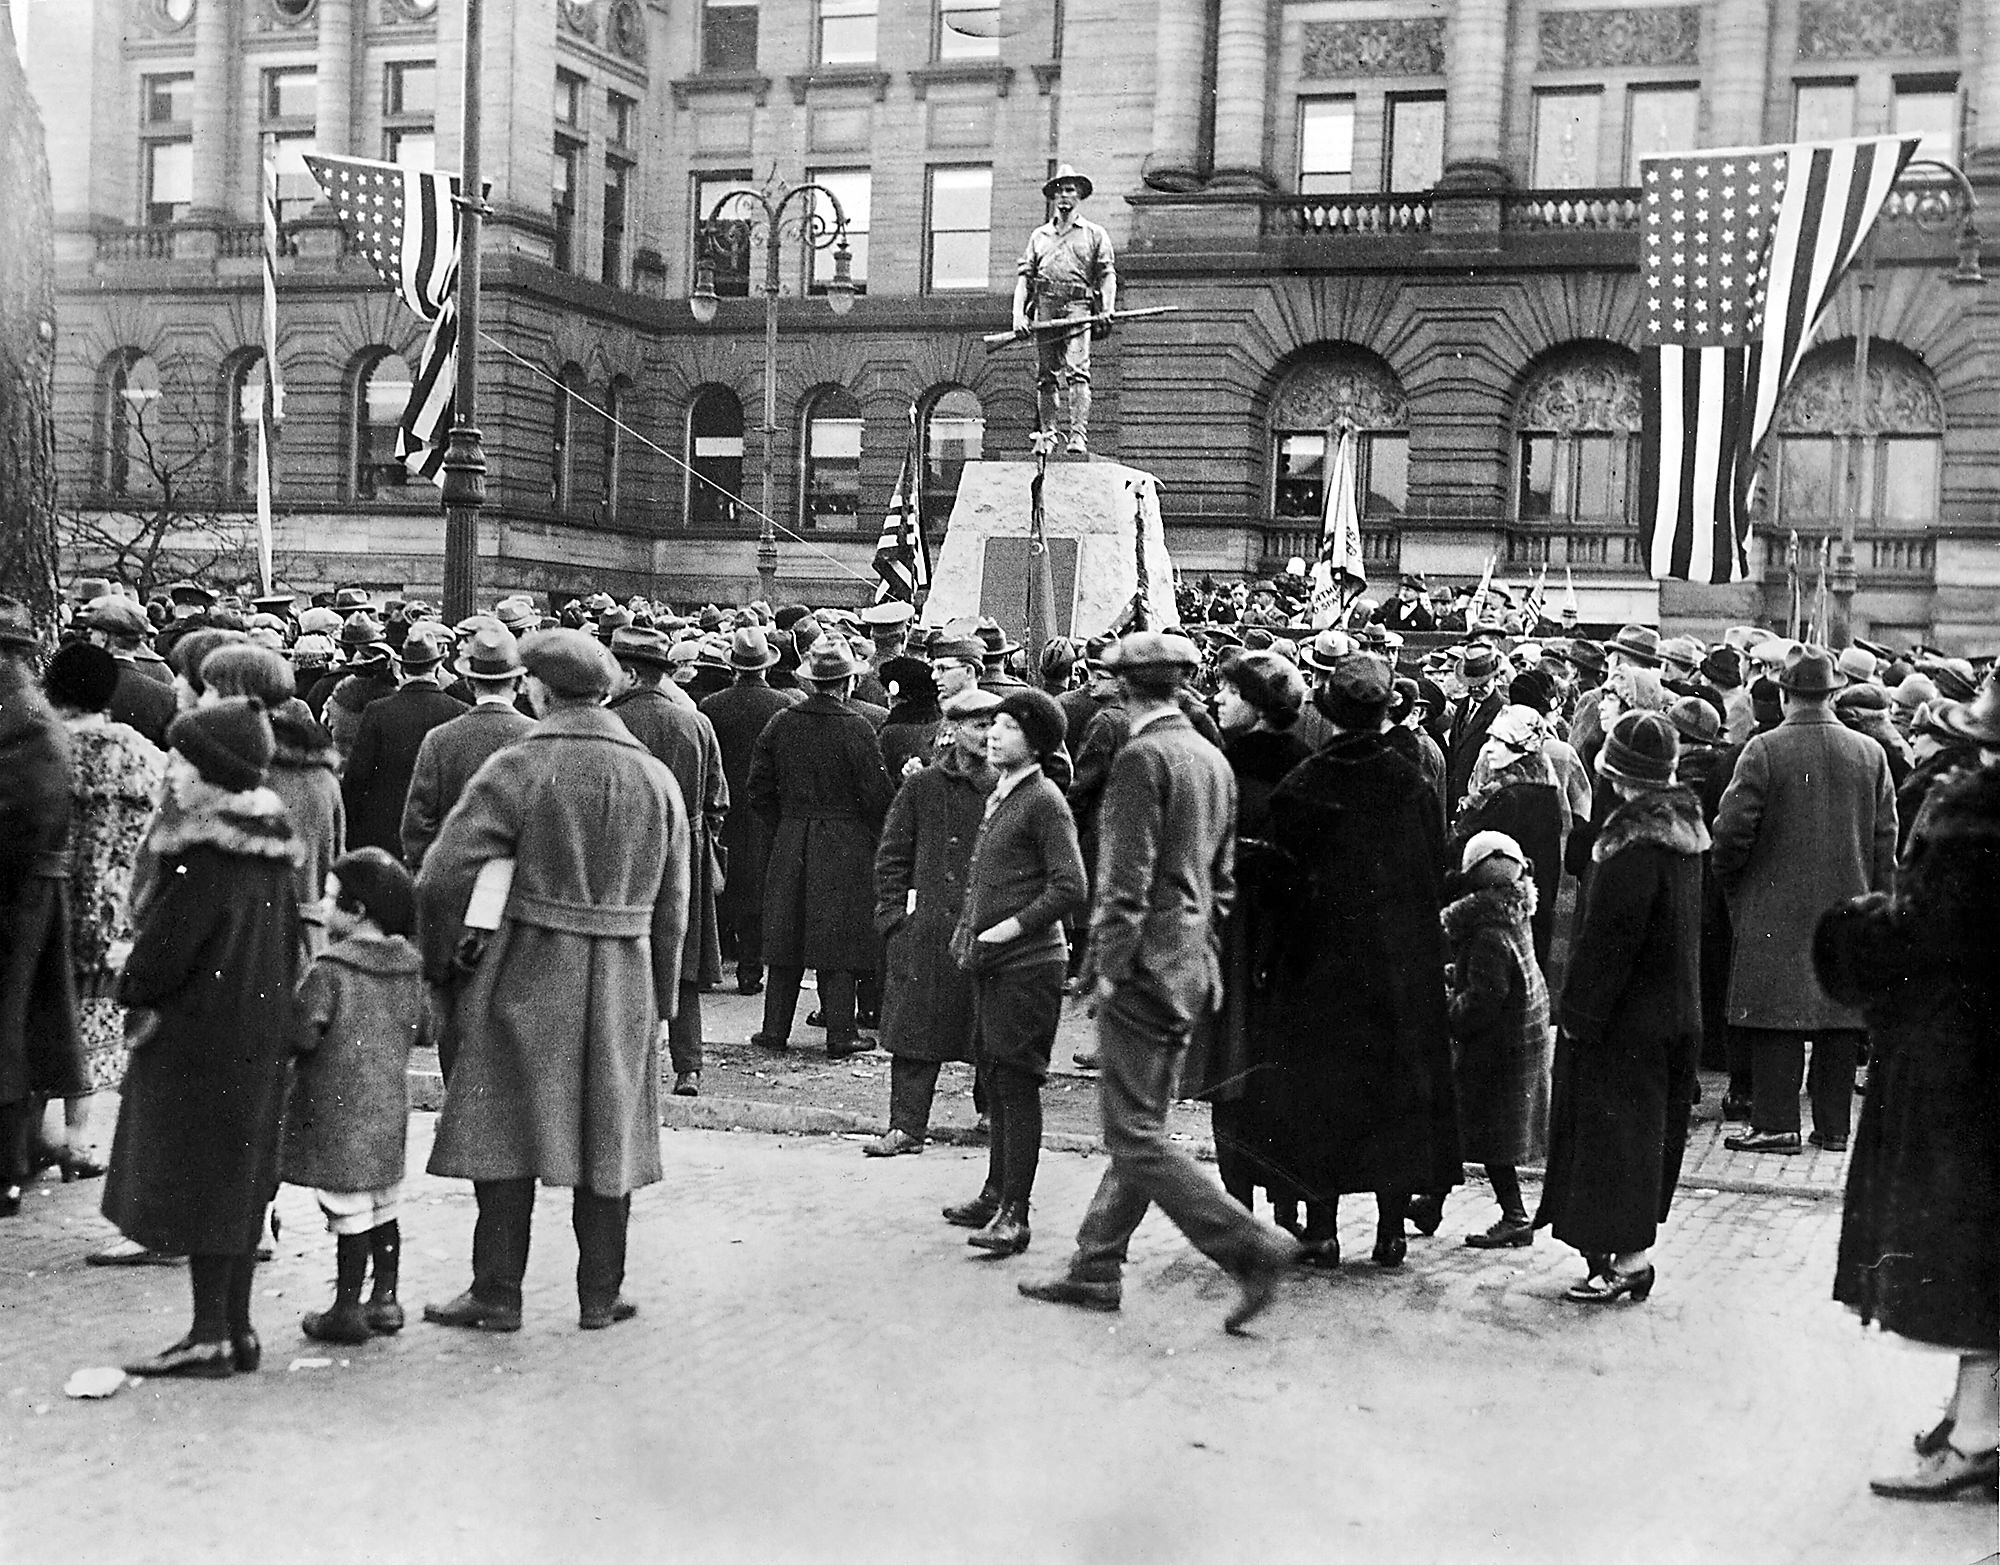 Veterans from the Civil War, Spanish American War, and WWI attend a ceremony with thousands of civilians to dedicate this memorial statue on the lawn of the Lucas County Courthouse in Ohio, US in 1927.